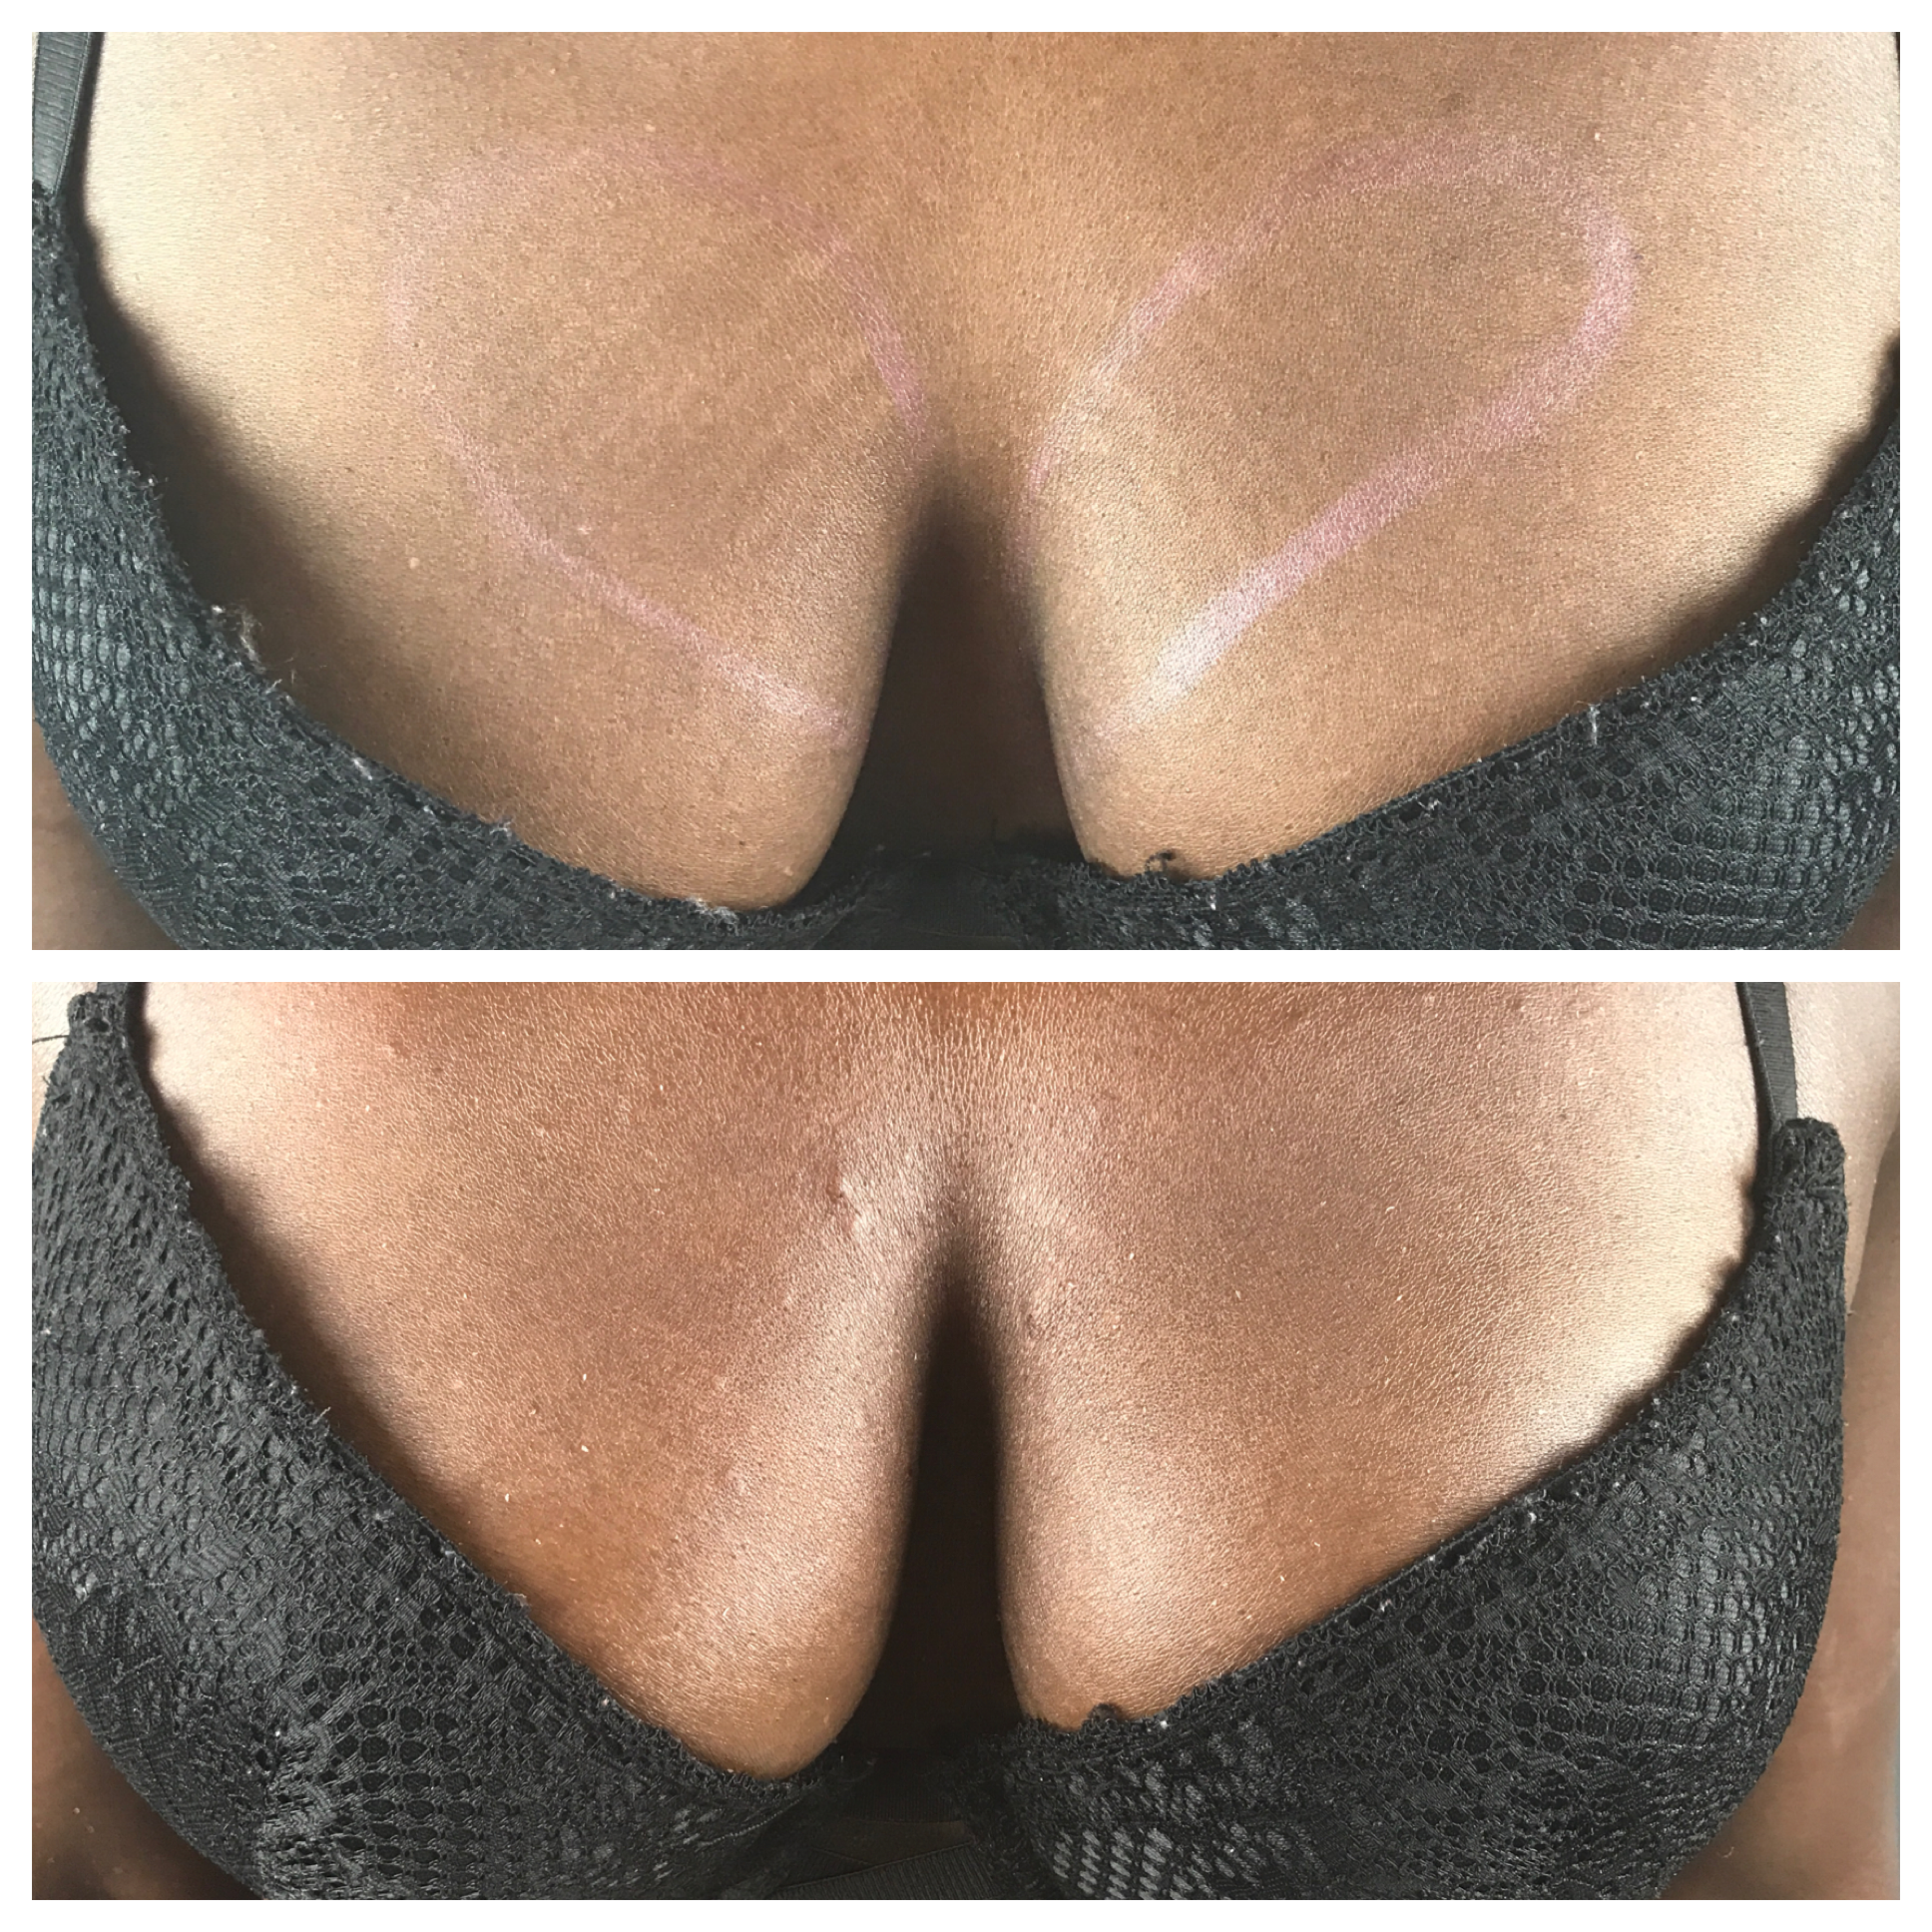 Vampire Breast Lift® Before & After Photos